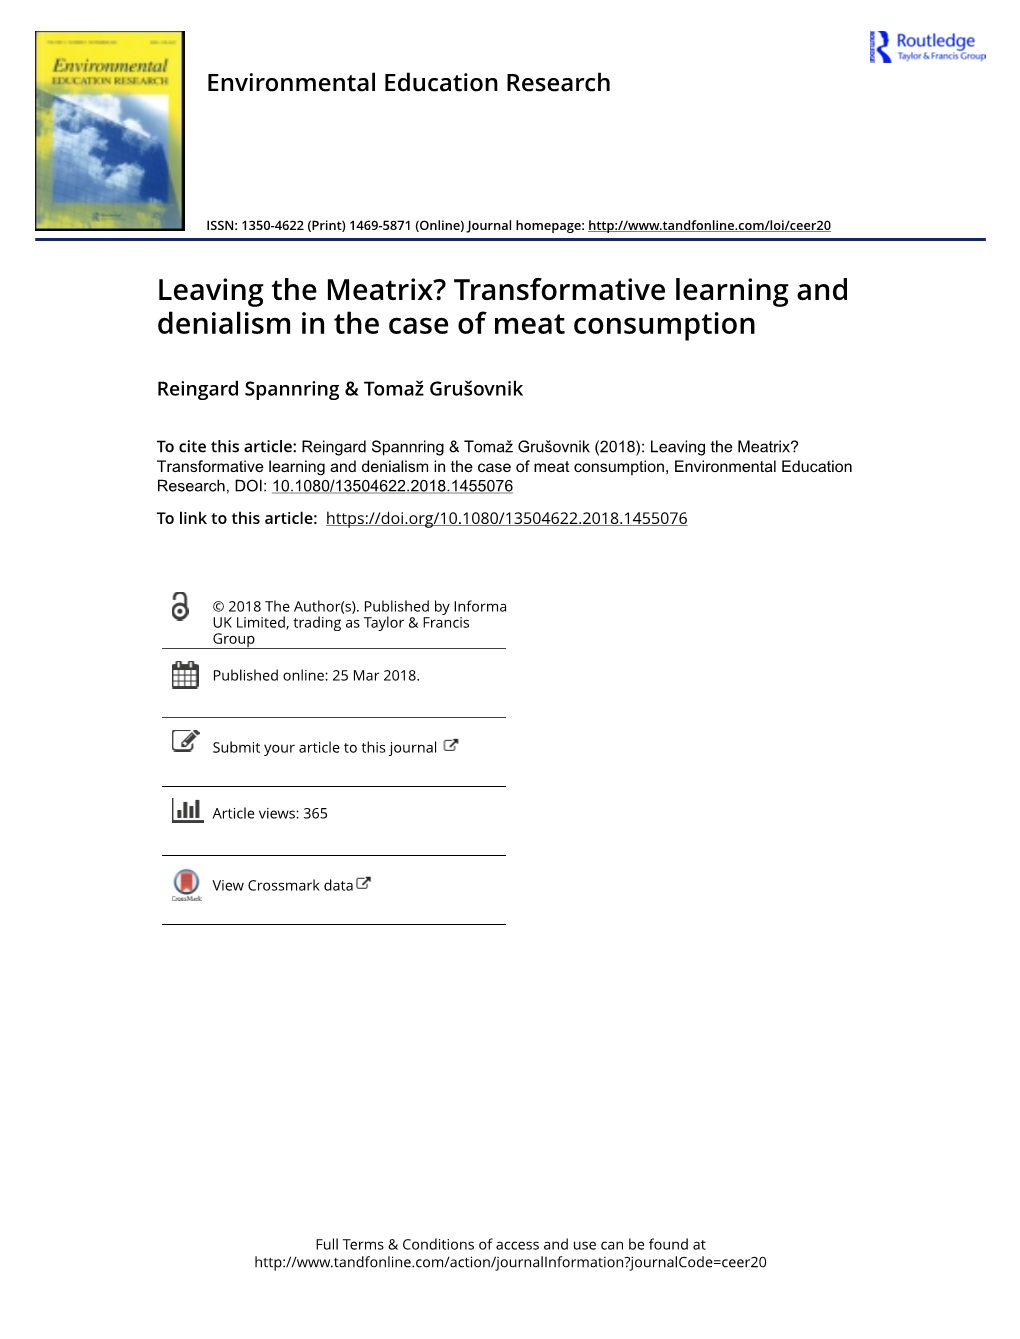 Leaving the Meatrix? Transformative Learning and Denialism in the Case of Meat Consumption